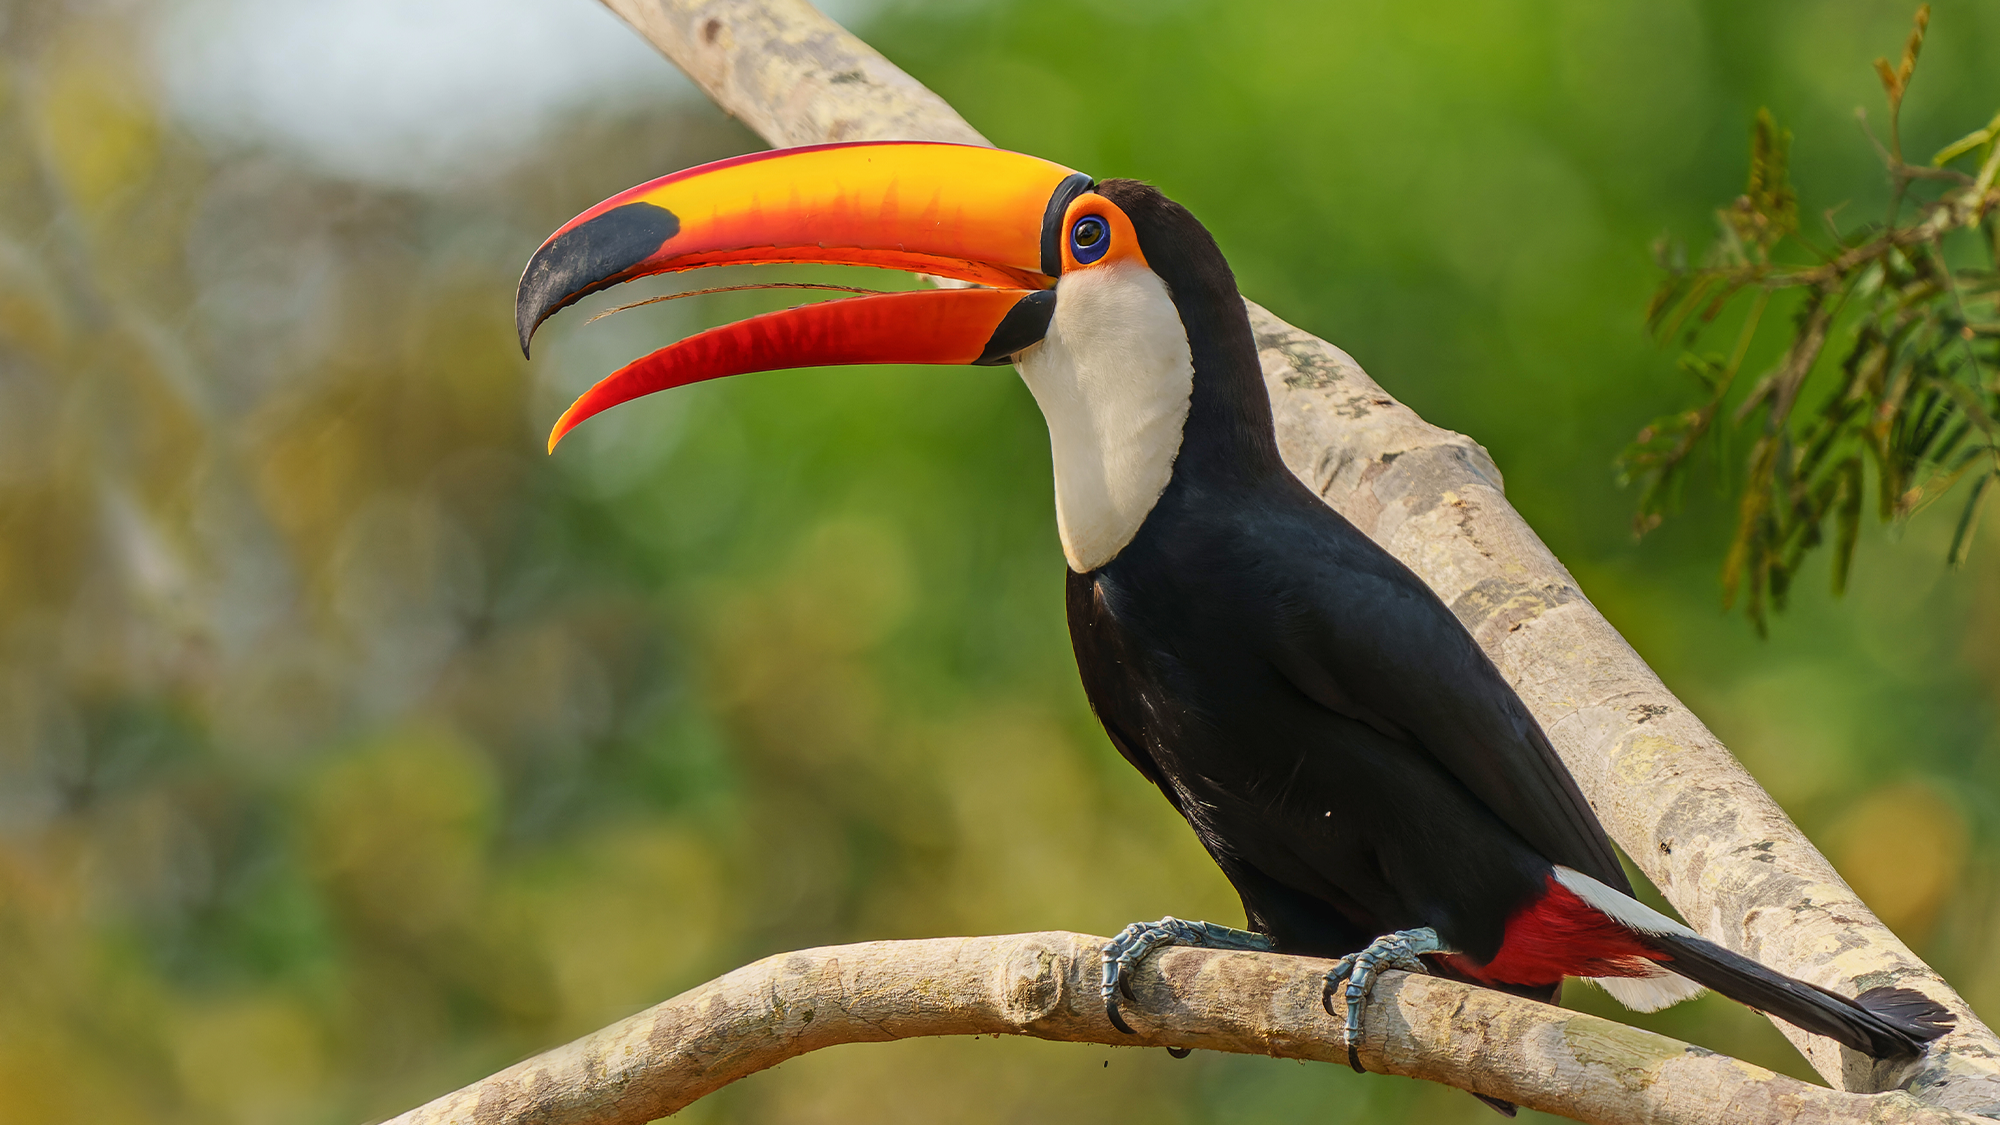 a toucan with an orange beak and black and white plumage sits in a tree with its mouth open